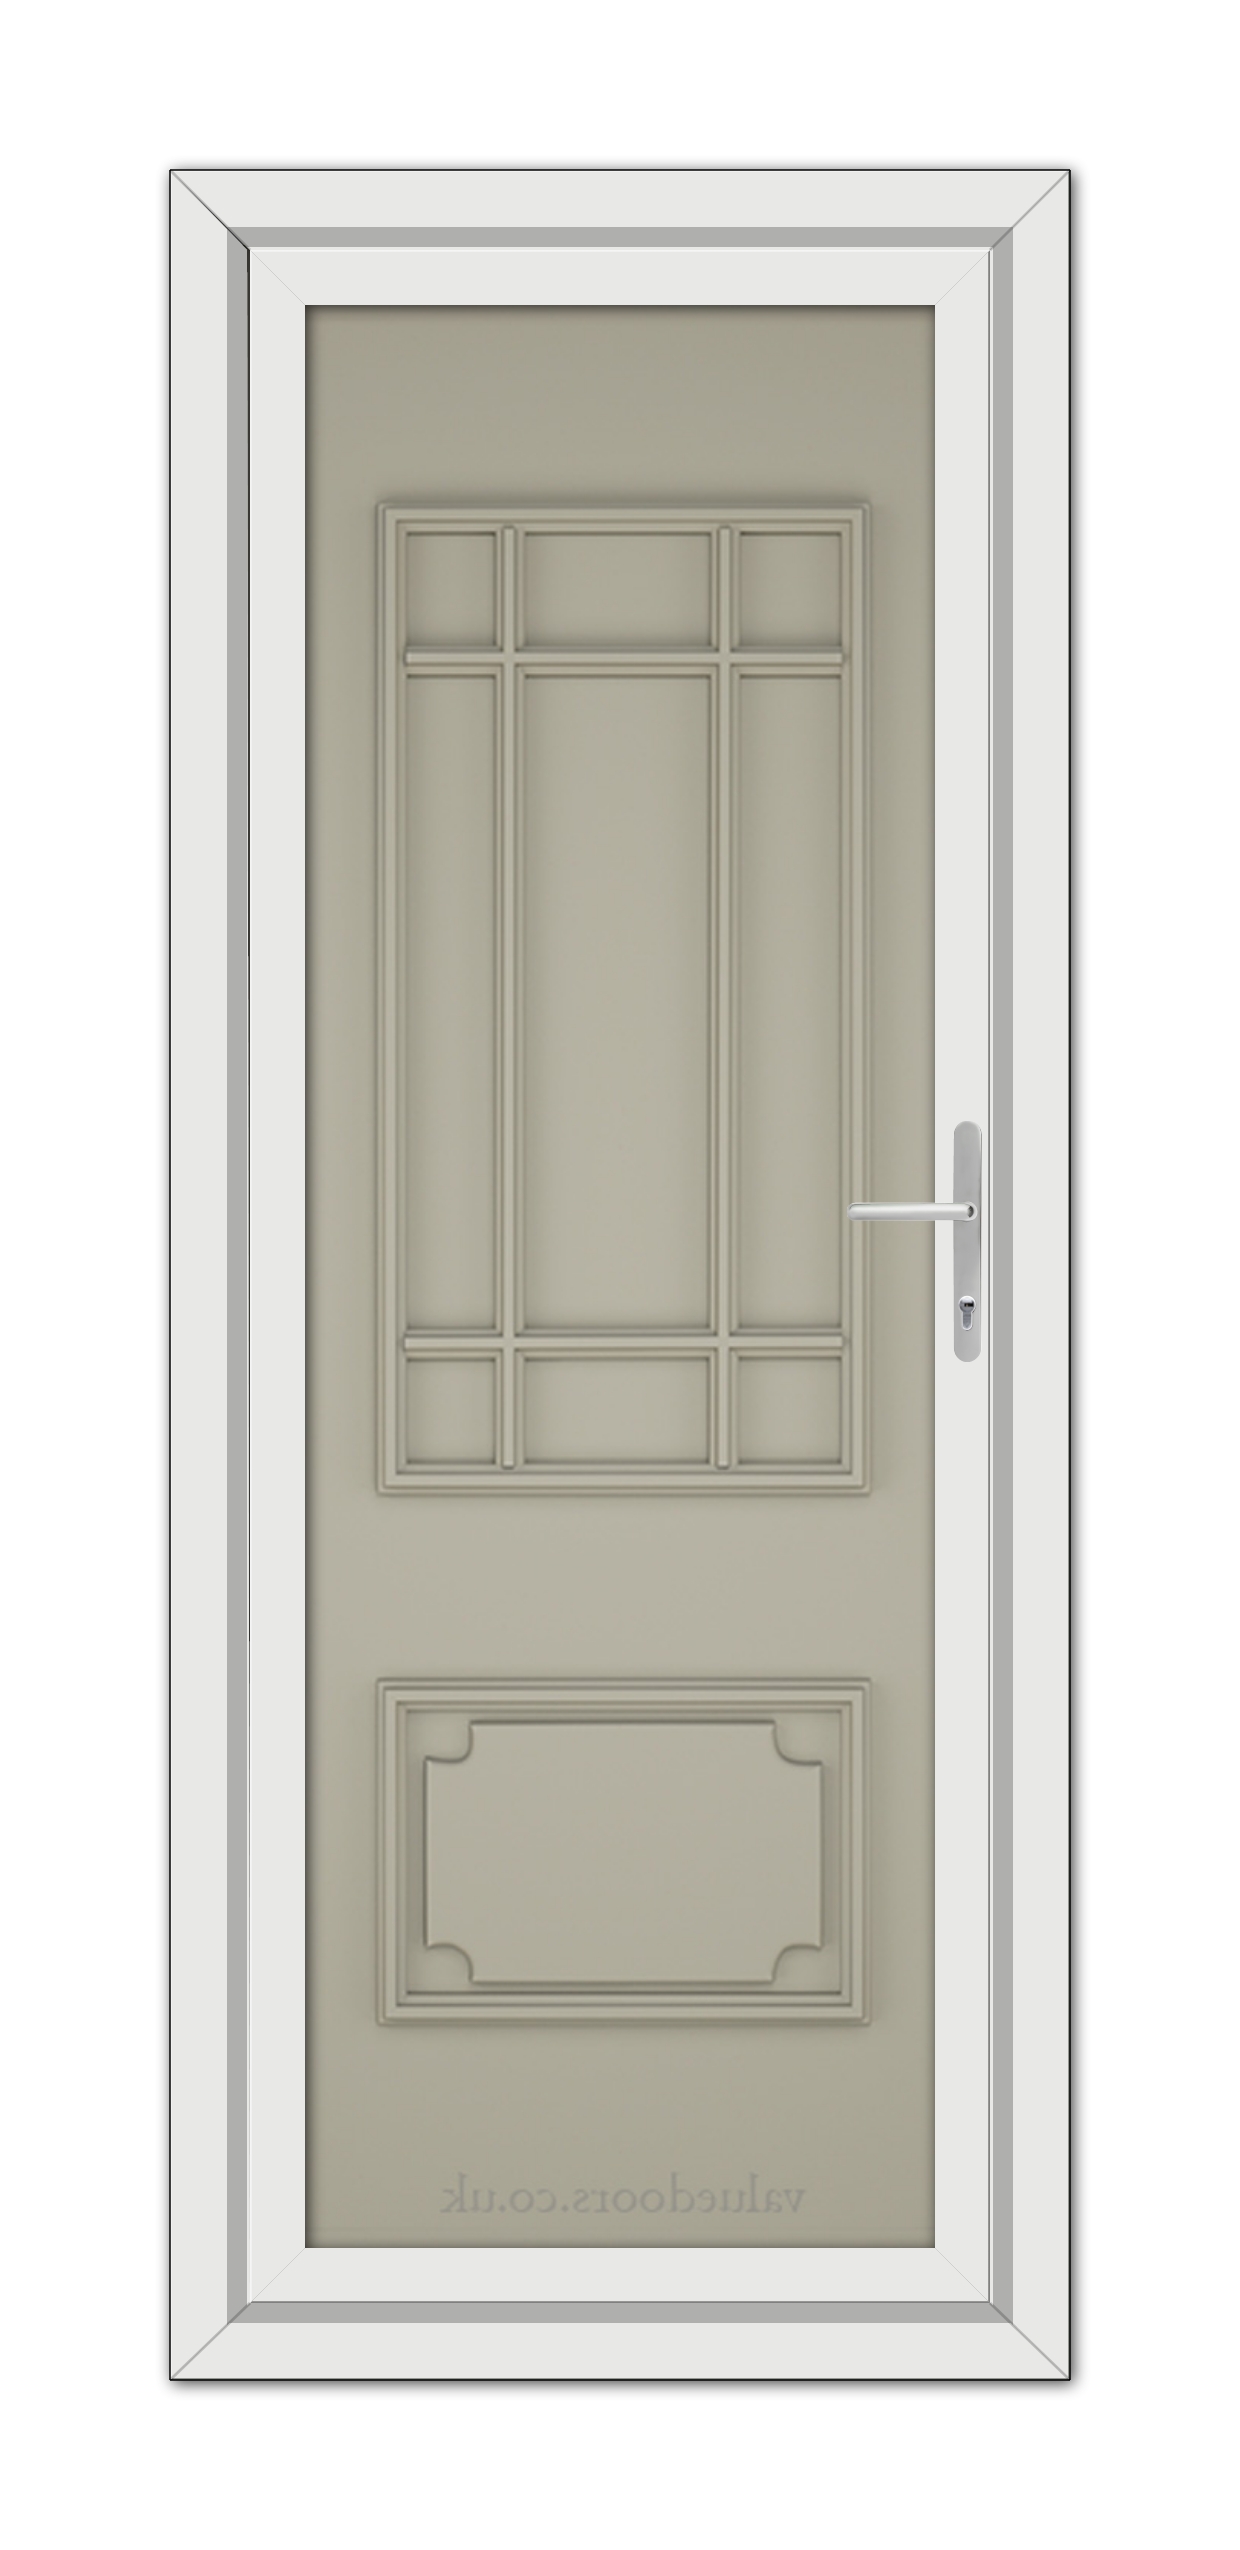 A modern Pebble Grey Seville Solid uPVC door with a rectangular window and a minimalist metal handle, set within a white frame.